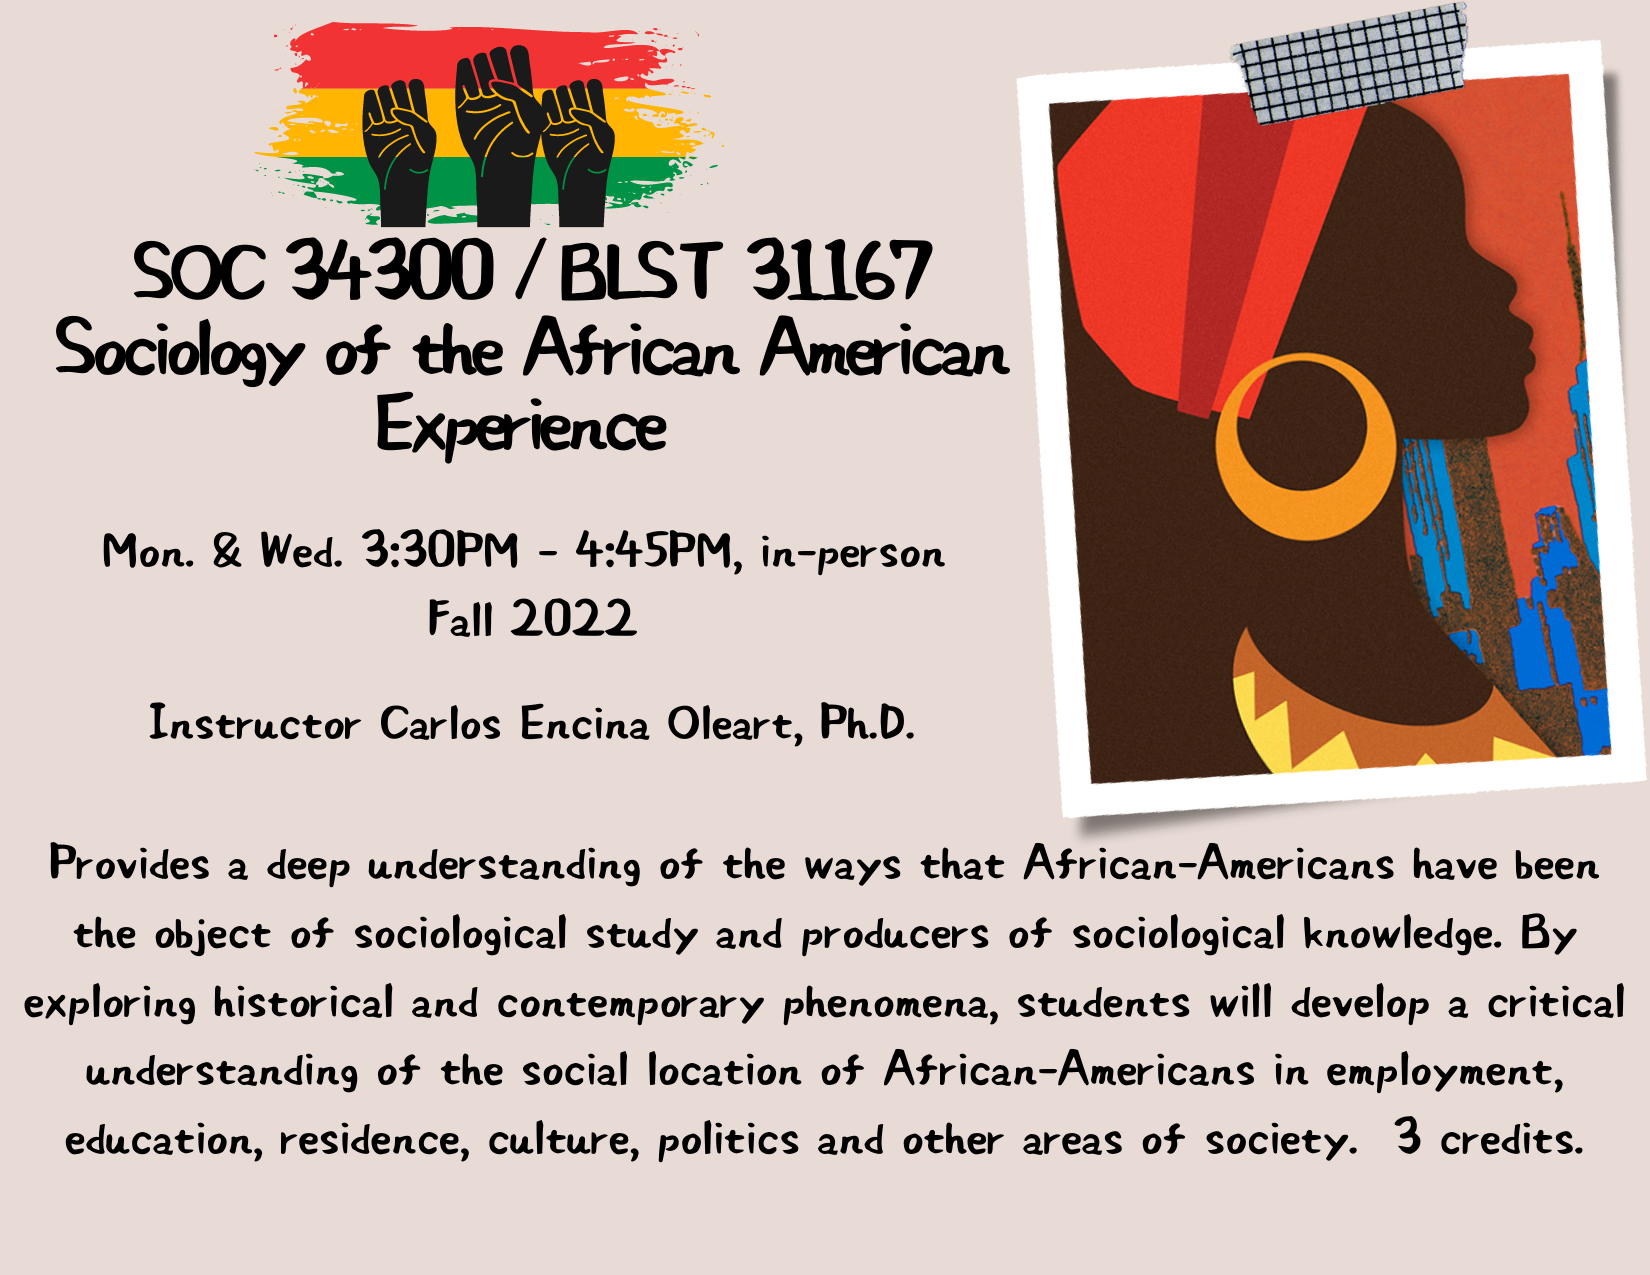 Sociology of the African American Experience Course Description